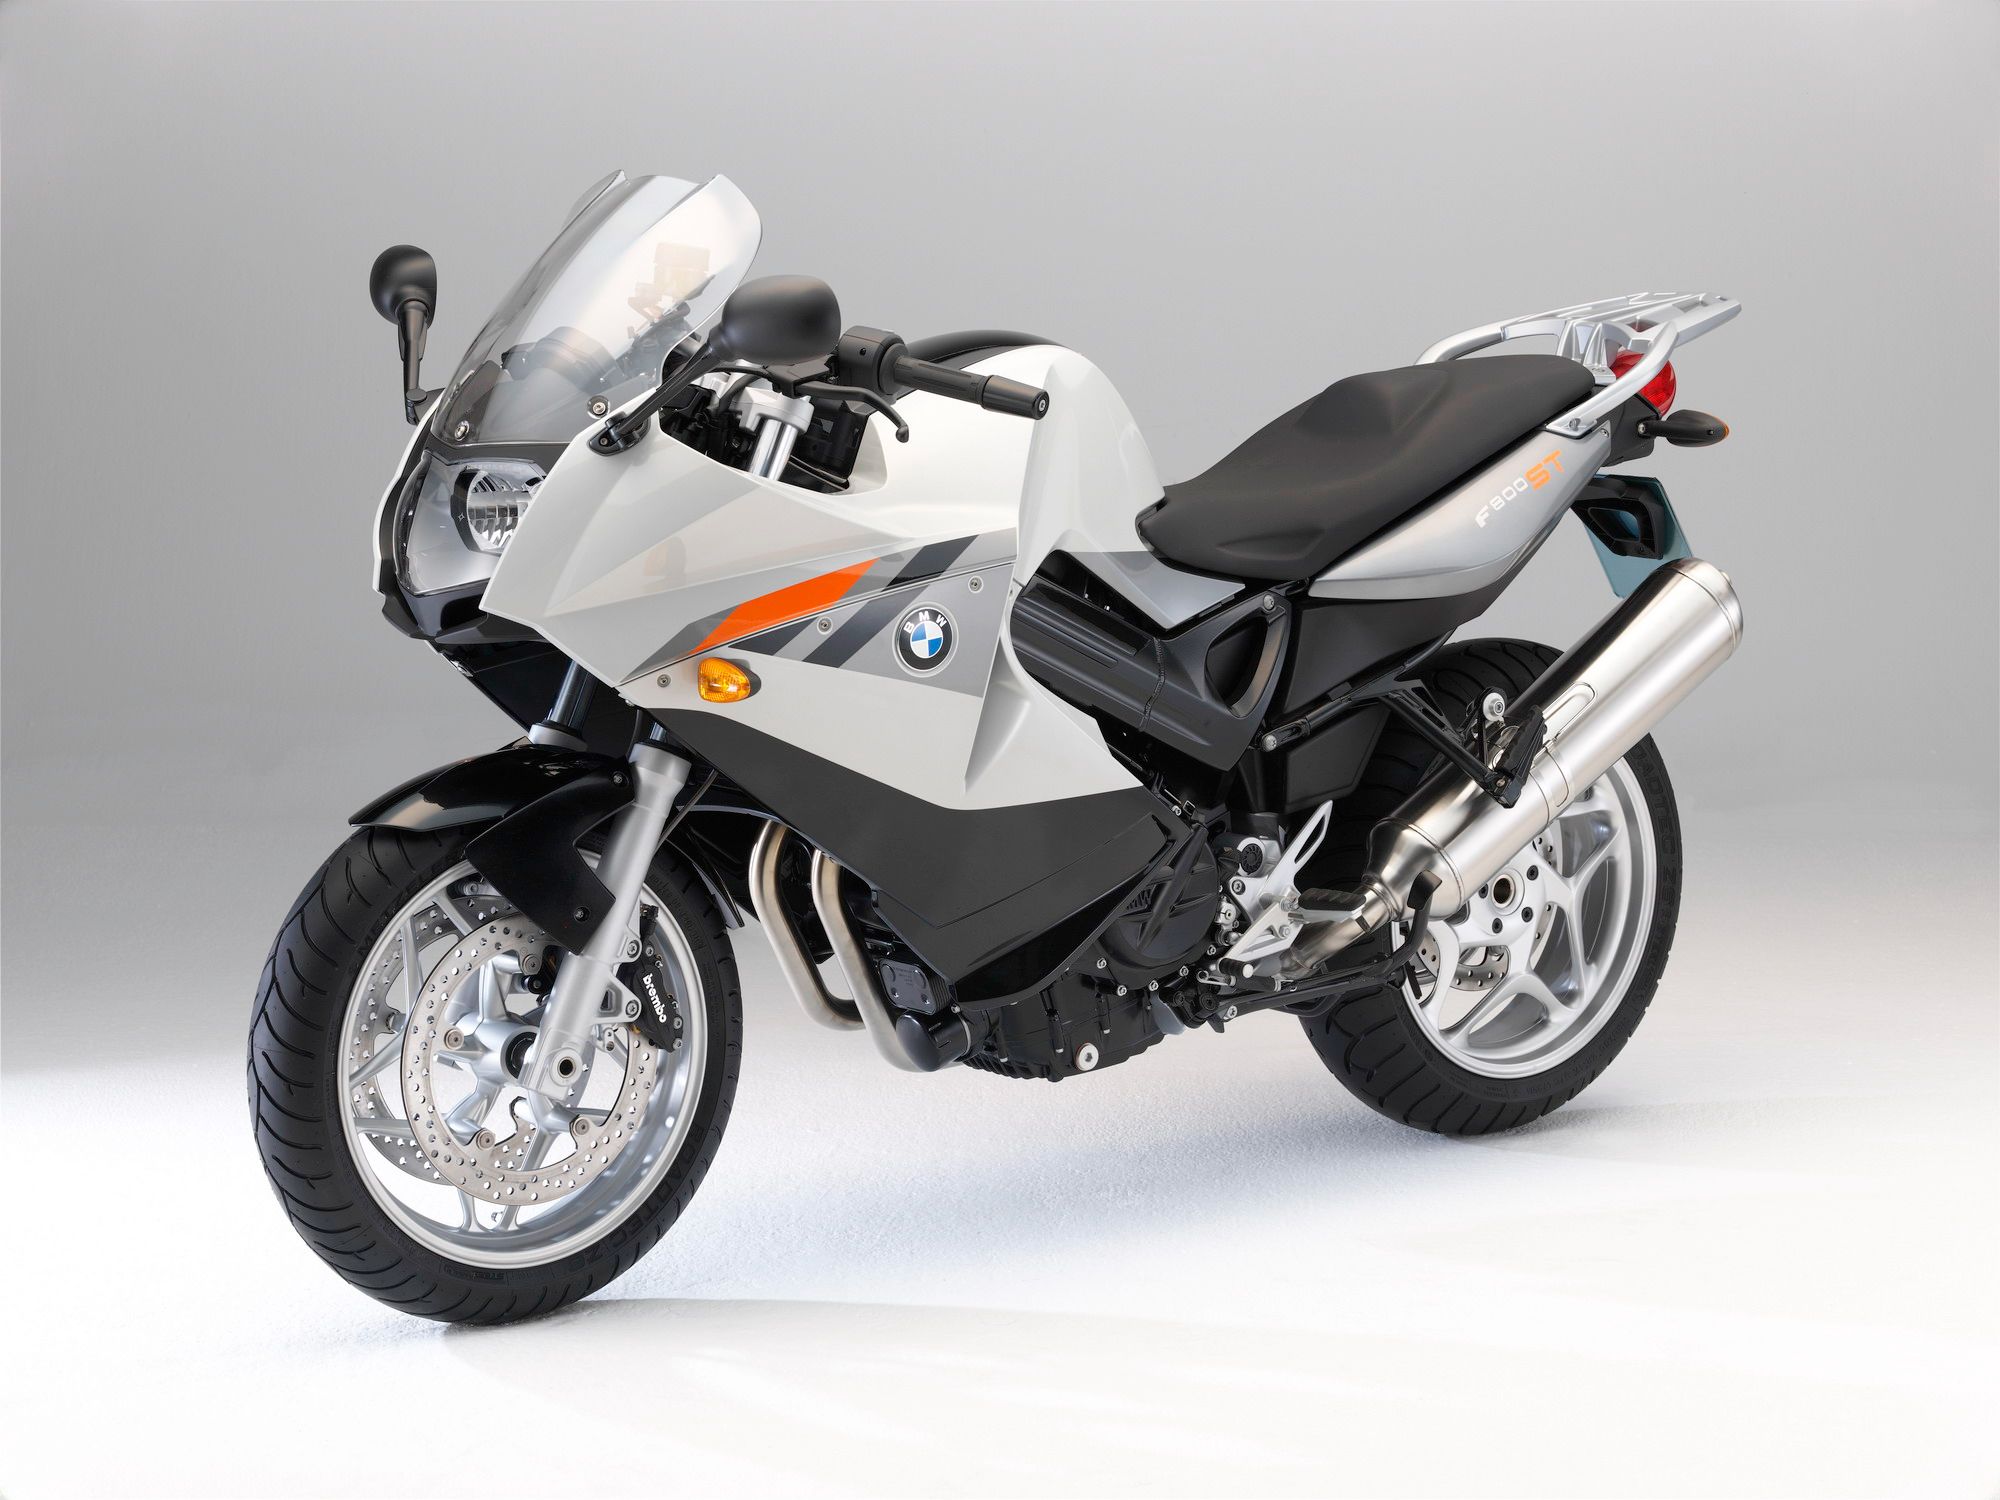 2011 BMW F 800 ST Touring and K 1300 R Dynamic special editions